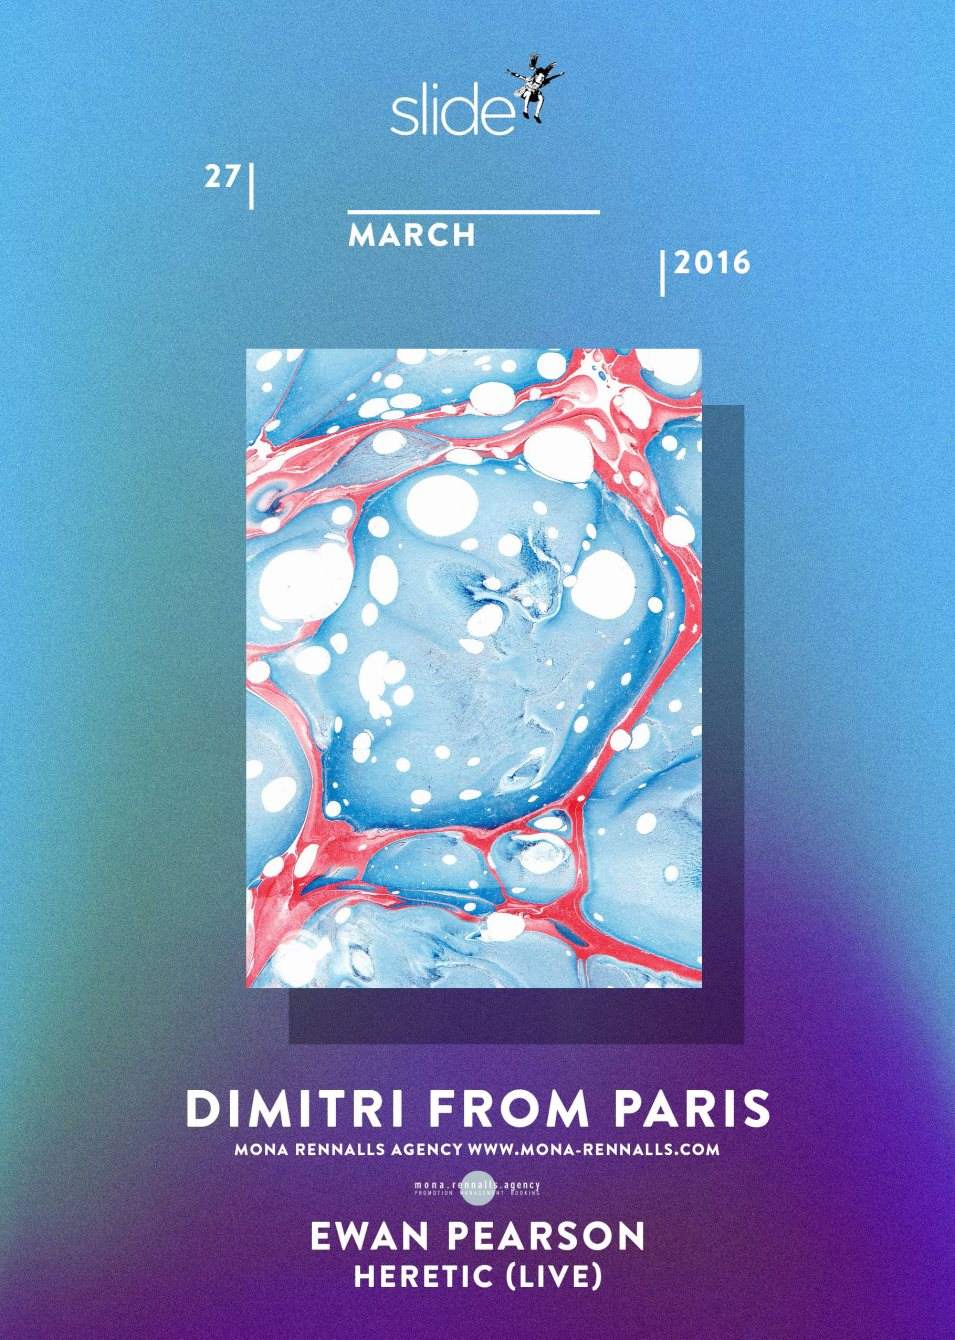 Slide Easter Sunday with Dimitri From Paris, Ewan Pearson & Heretic (Live) - Página frontal